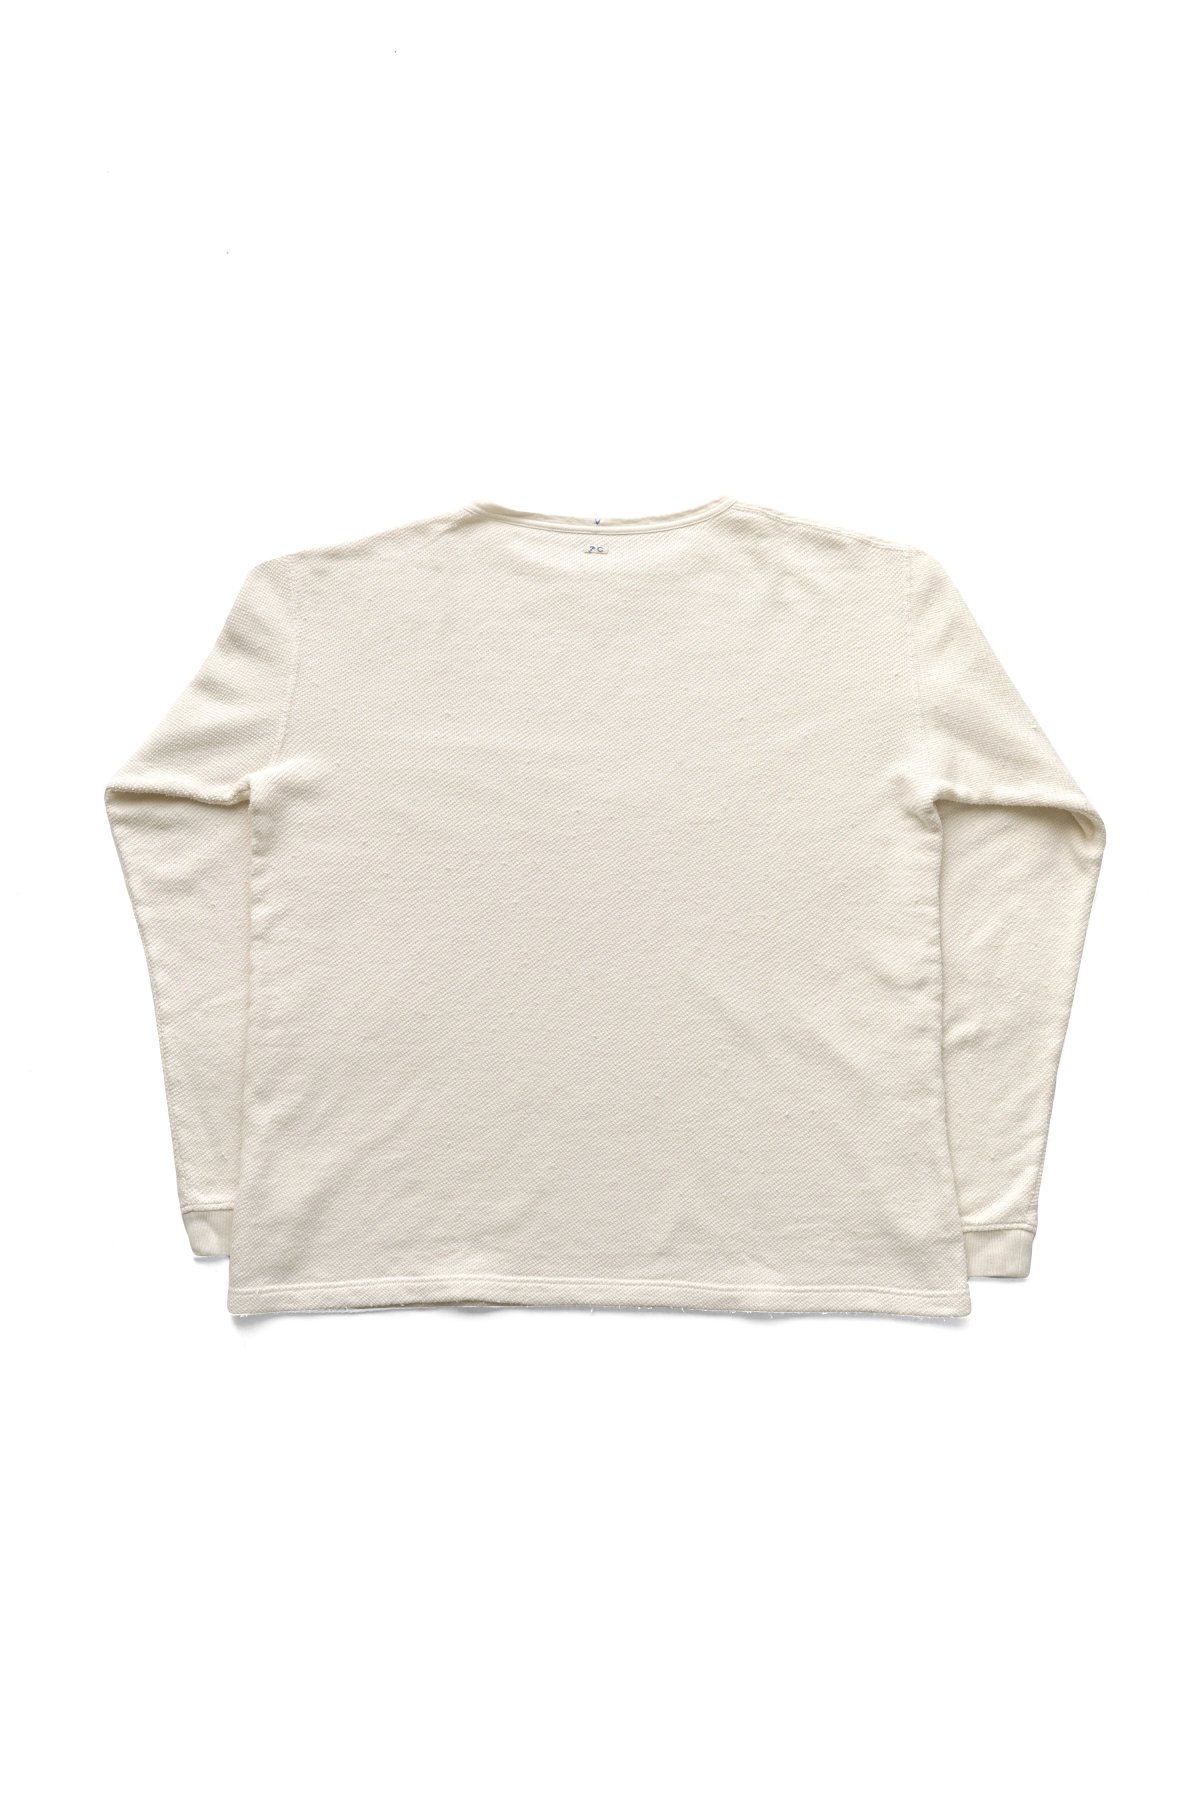 Porter Classic - FRENCH THERMAL CREWNECK - WHITE ポーター